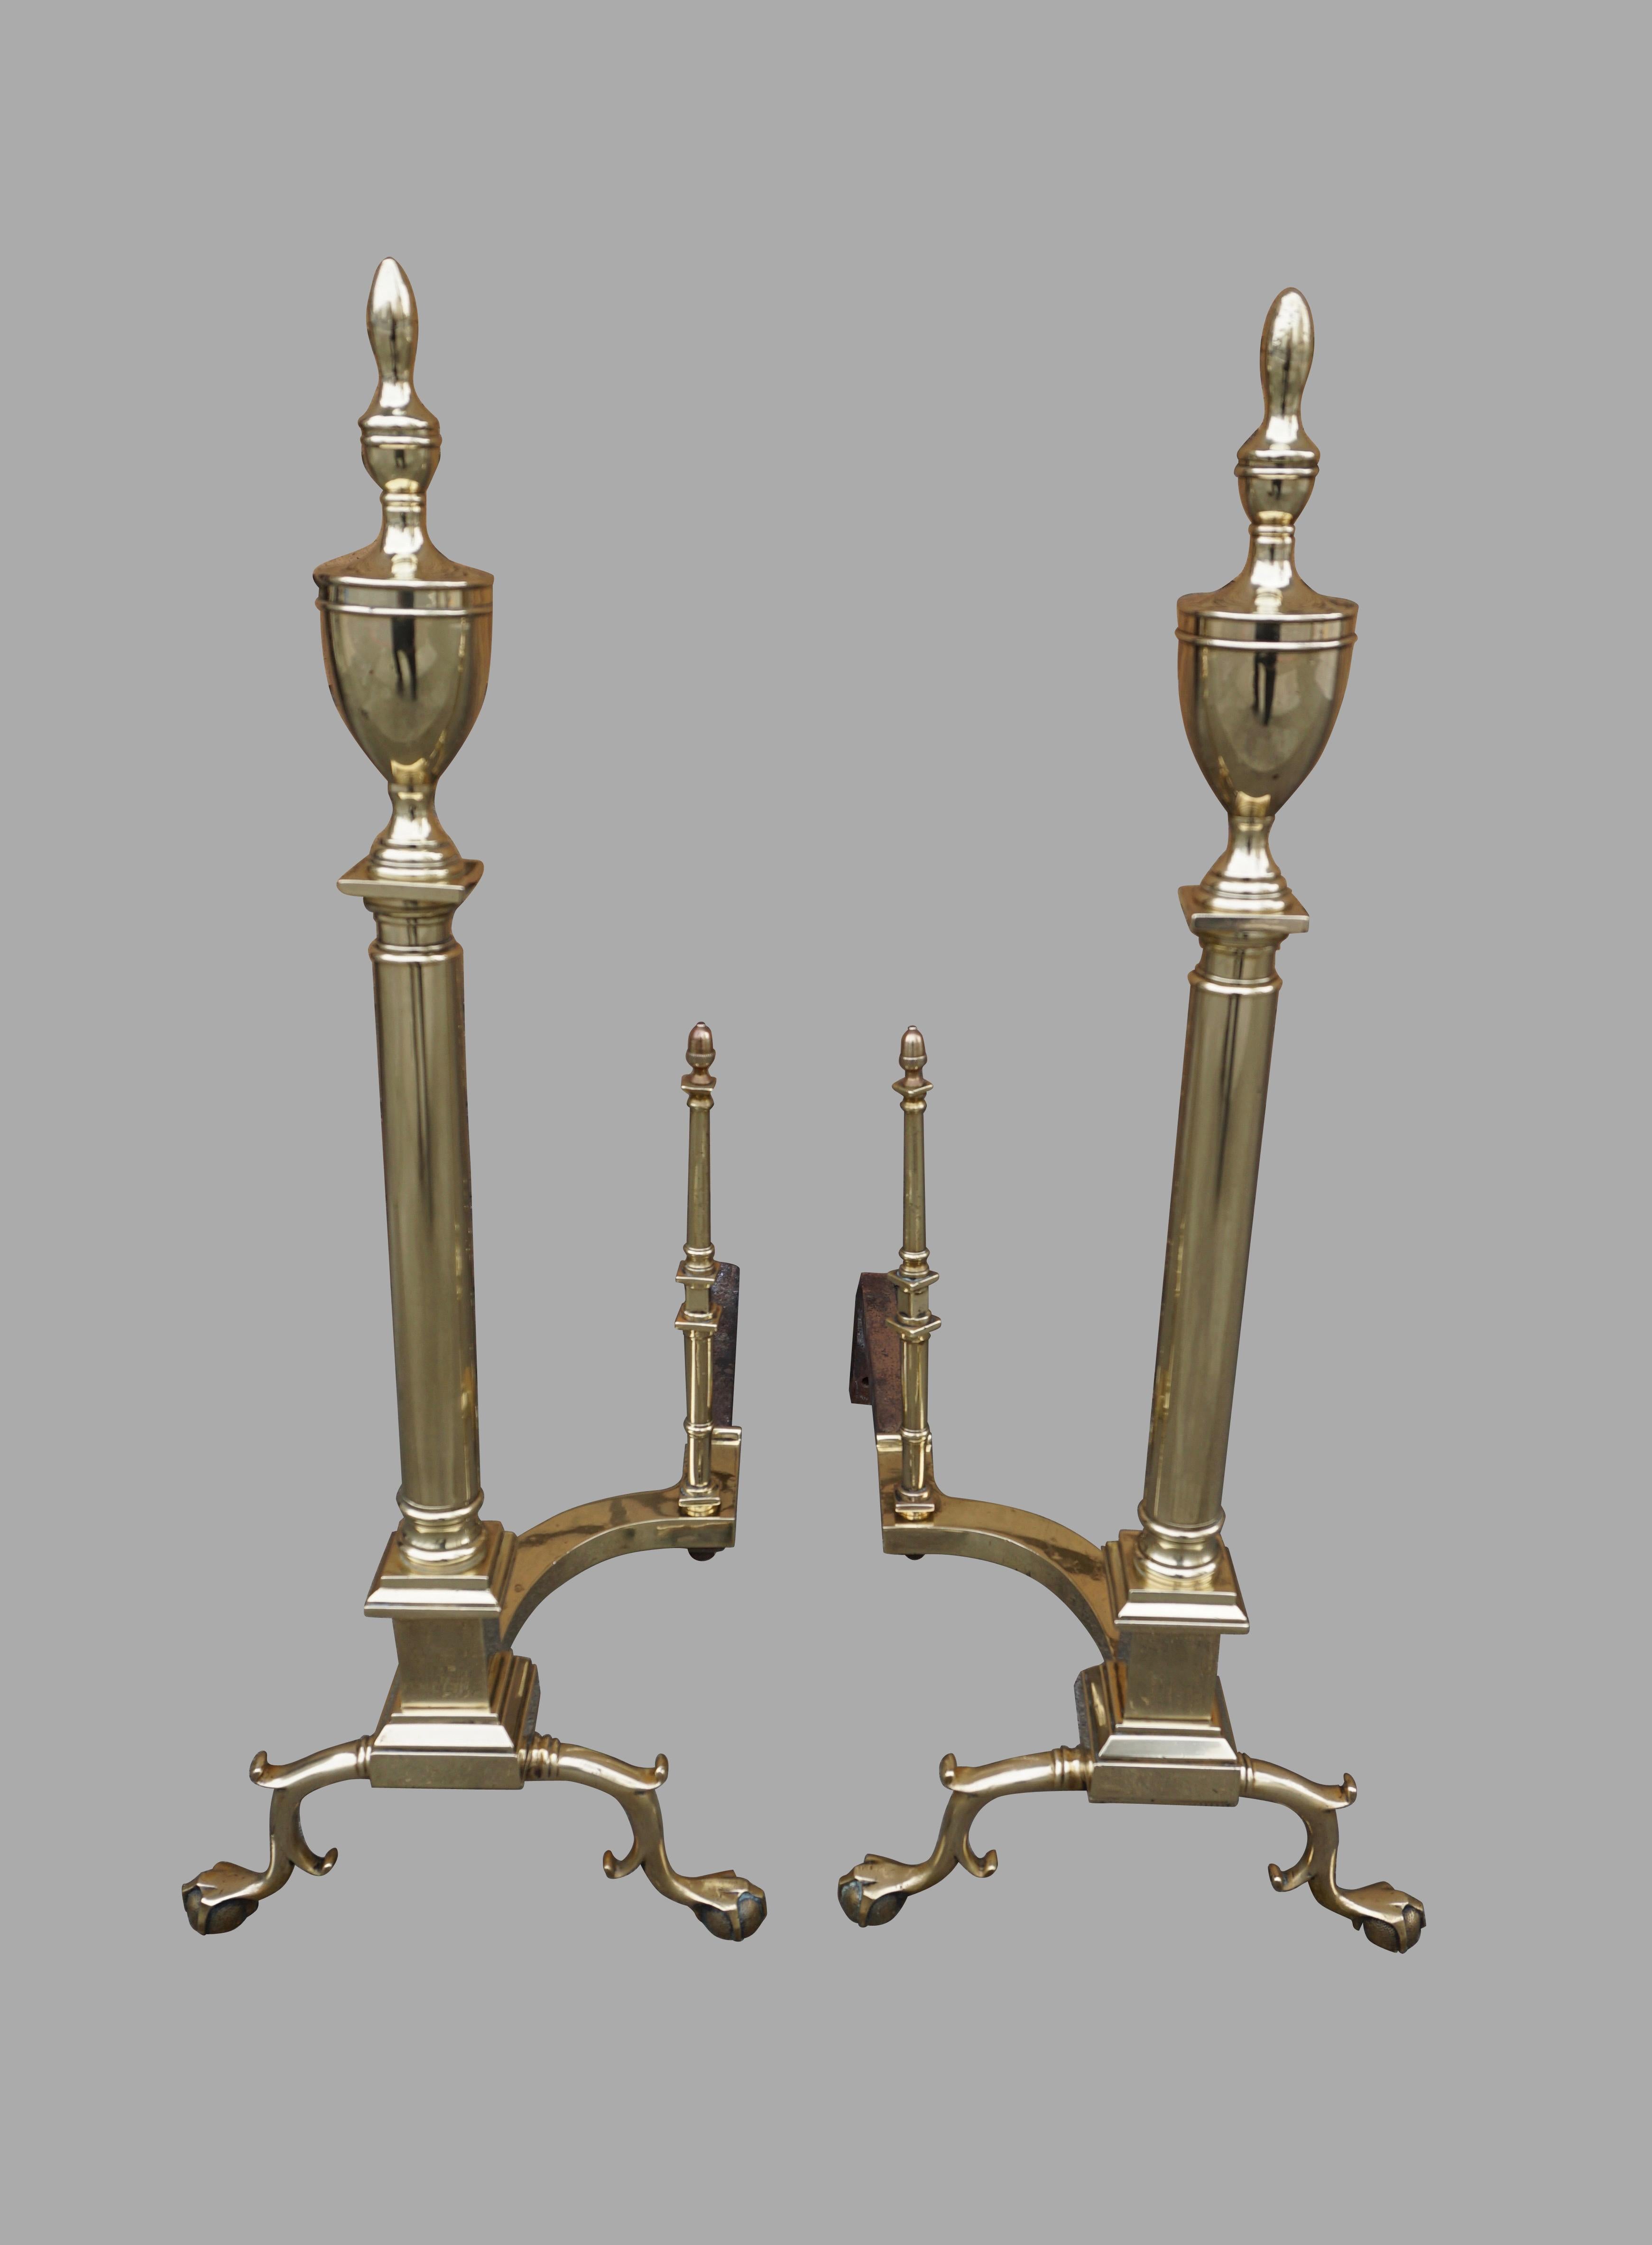 American Impressive Large Scale Federal Style Brass Andirons with Ball and Claw Feet